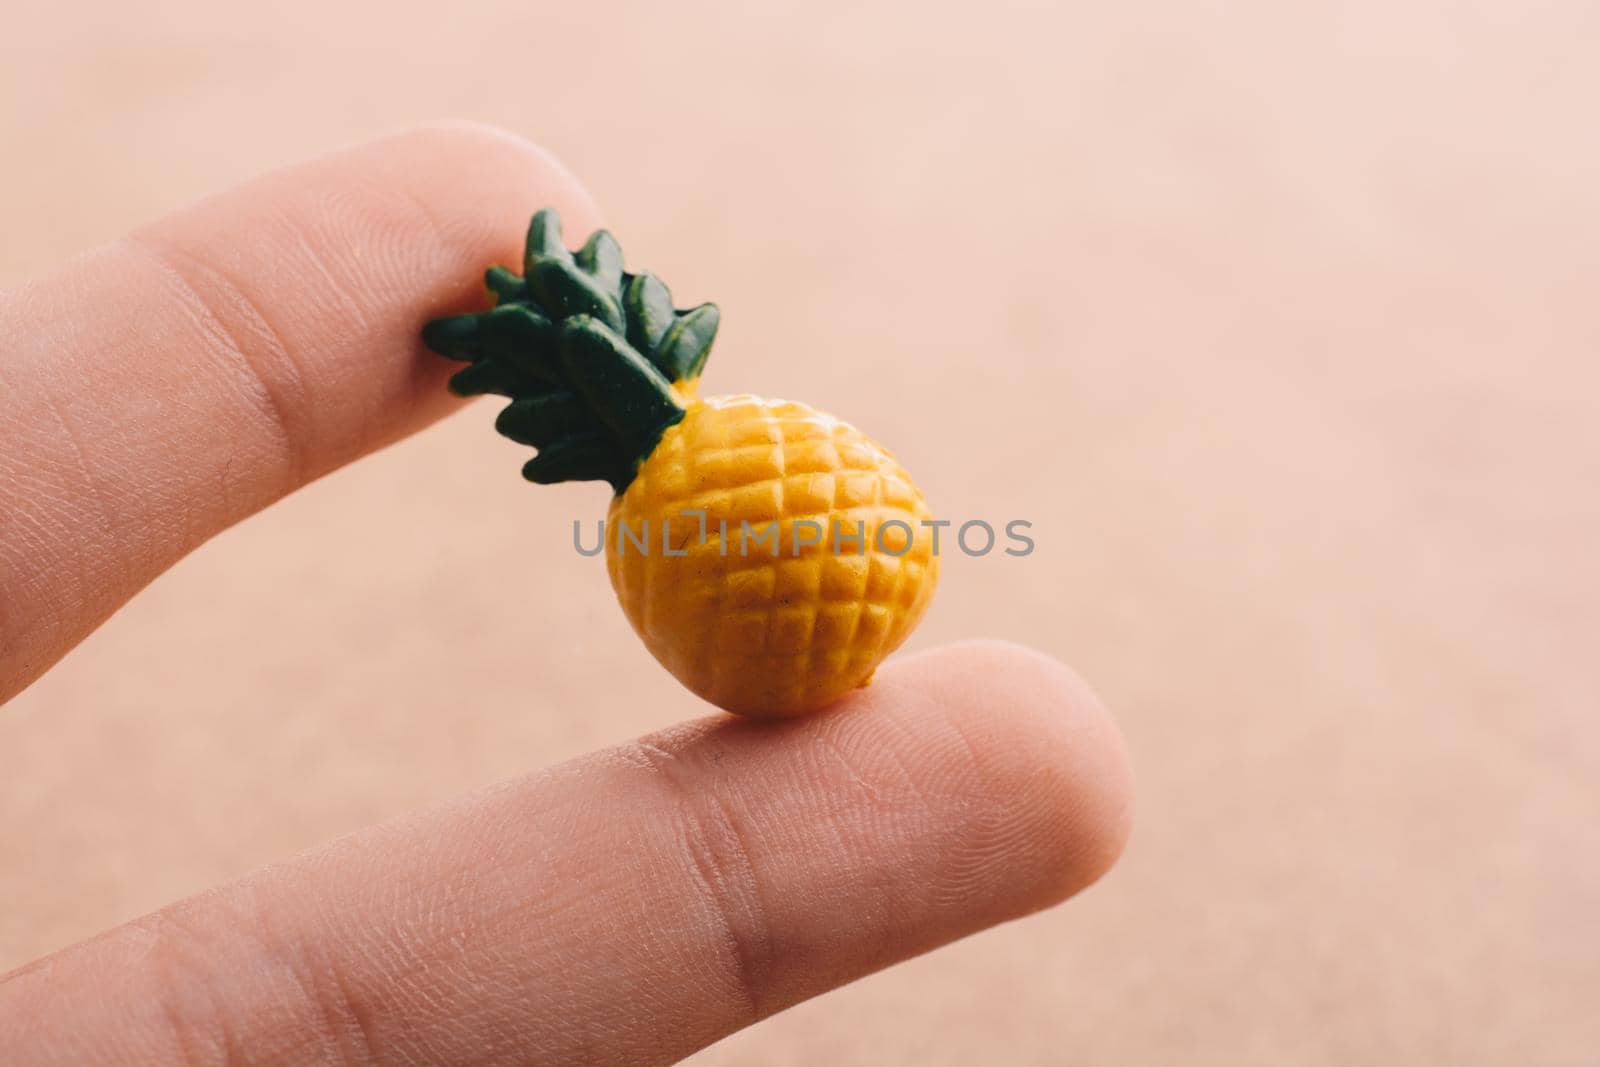 Hand holding a tiny pineapple miniature on a background on display